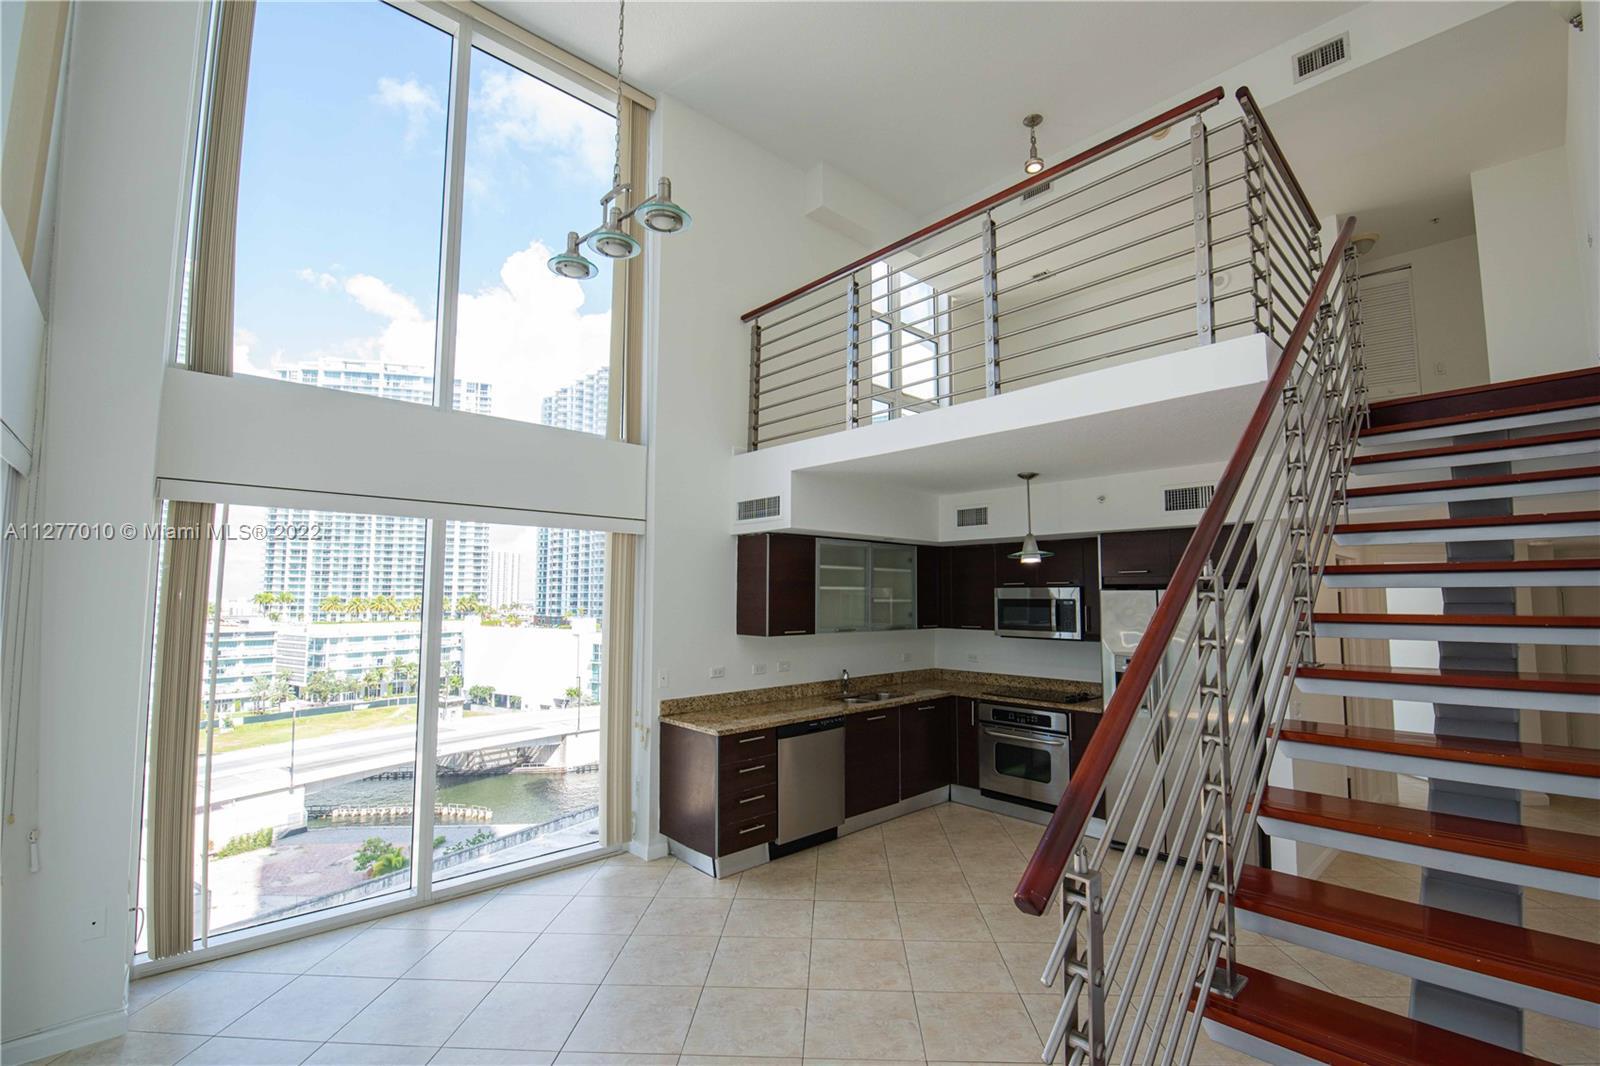 Live in the very heart of Brickell in this beautiful and spacious two-story loft. Featuring two gene